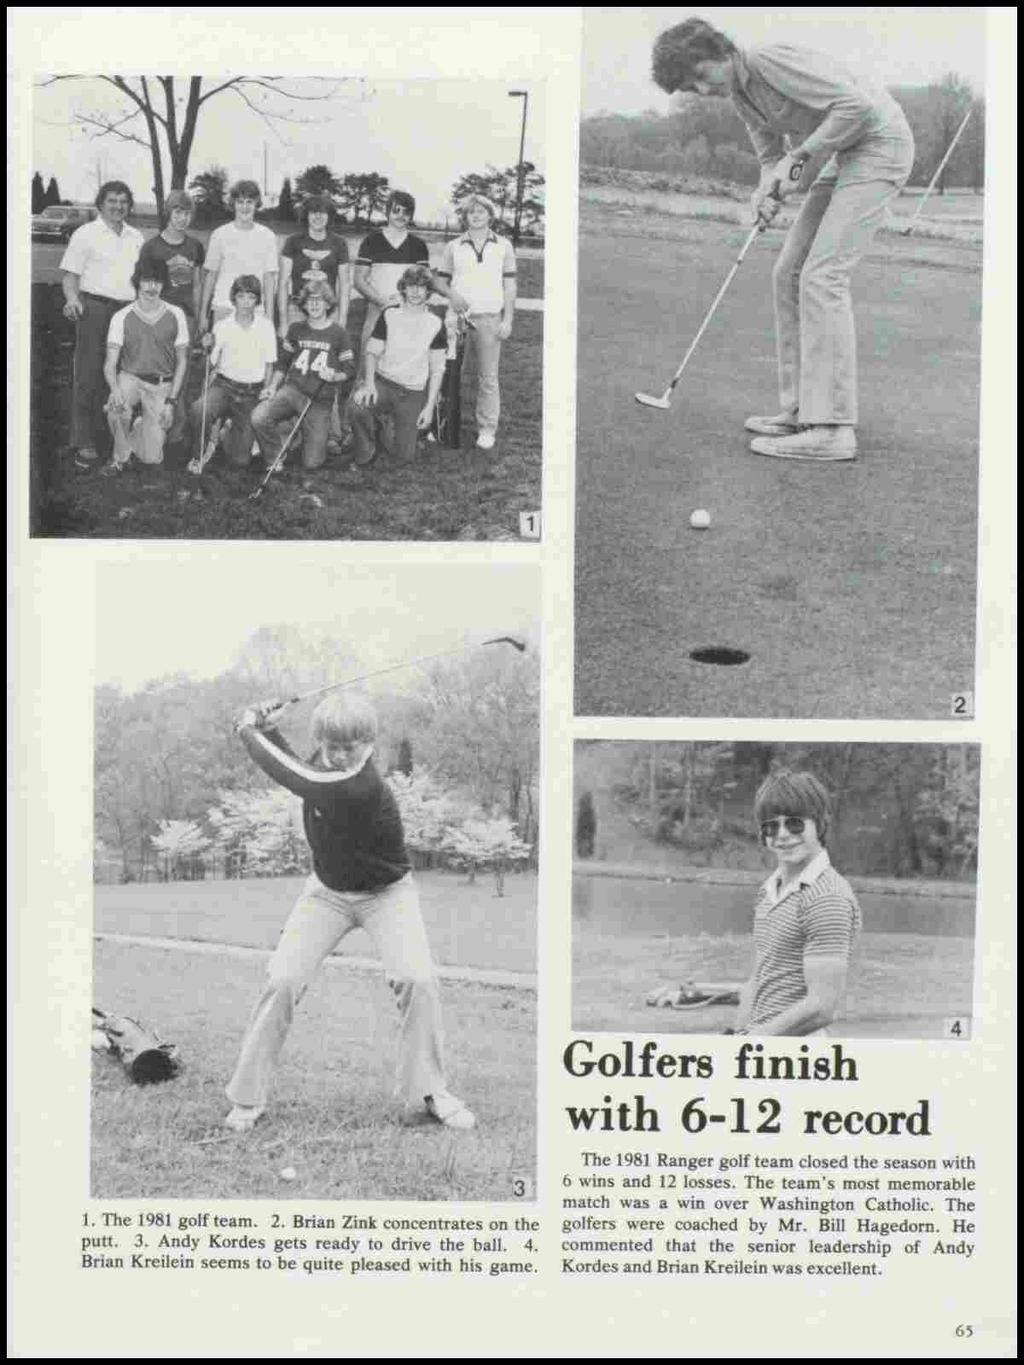 1. The 1981 golf team. 2. Brian Zink concentrates on the putt. 3. Andy Kordes gets ready to drive the ball. 4. Brian Kreilein seems to be quite pleased with his game.